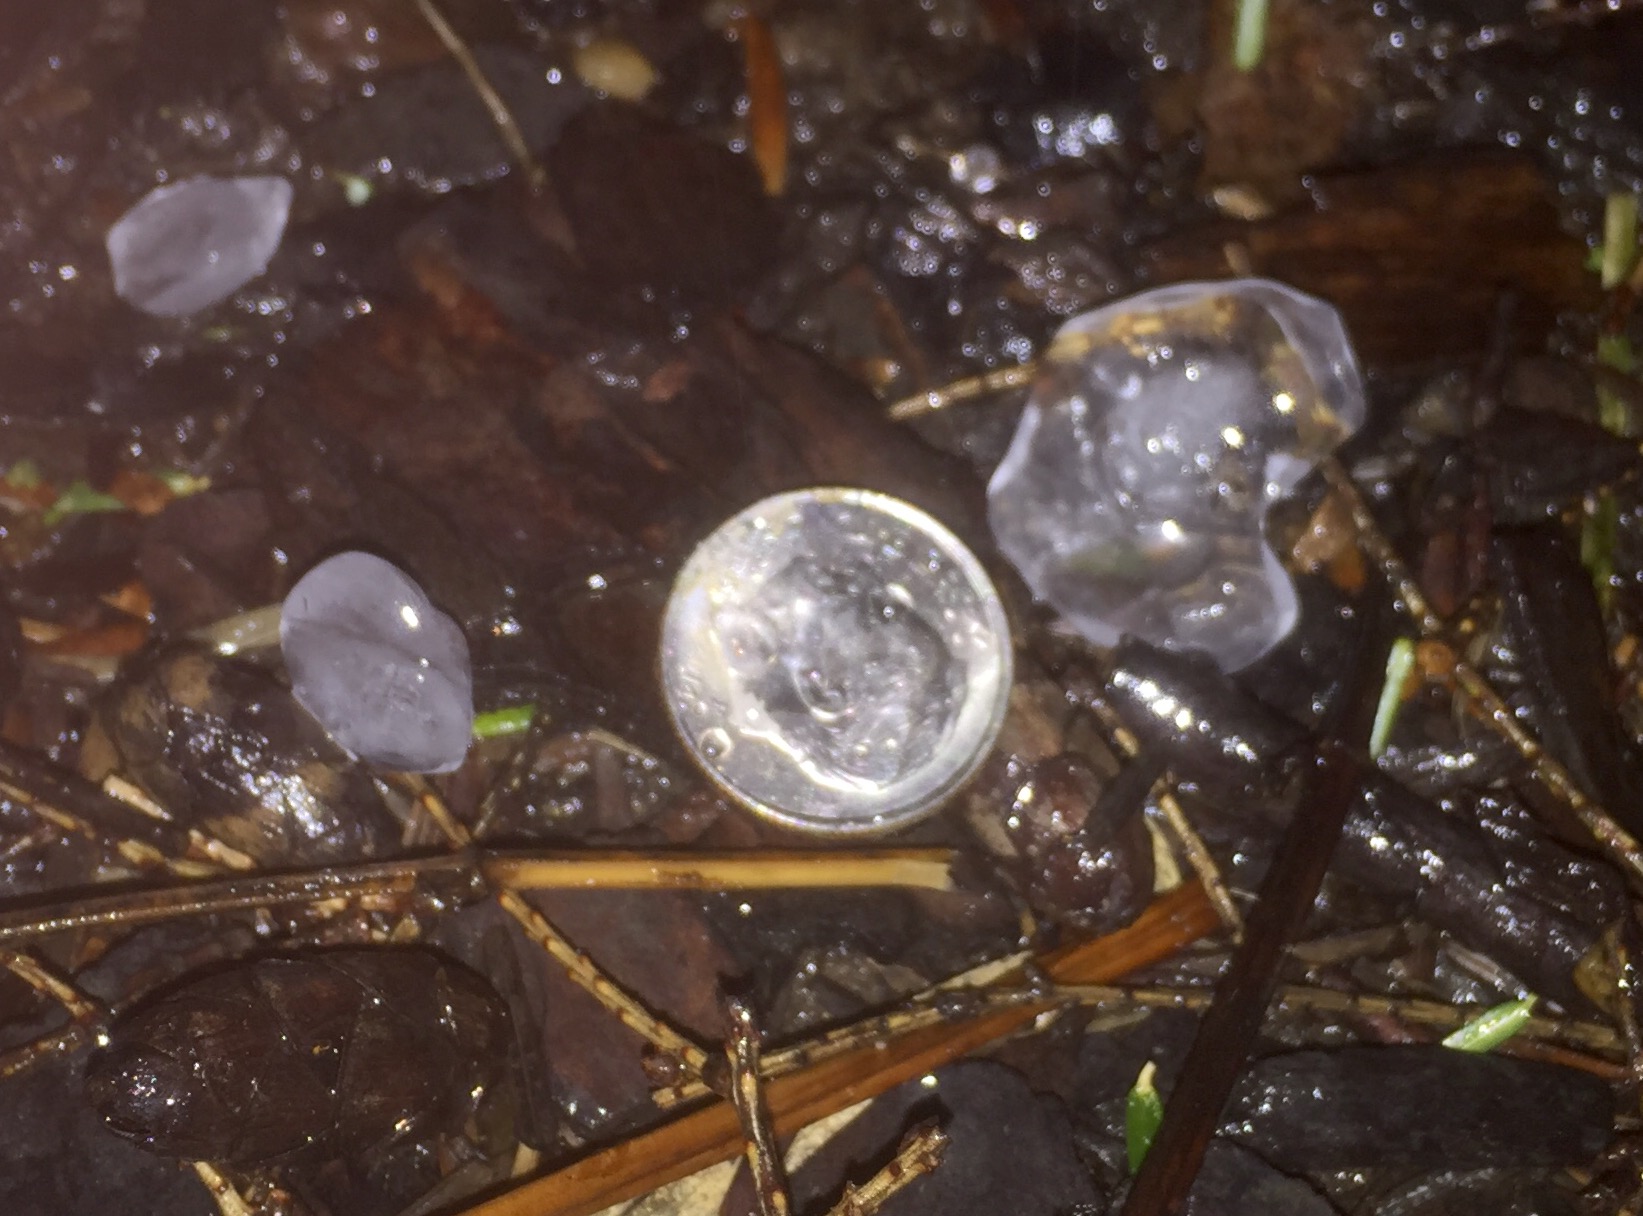 Hail was marble- to dime-sized in Tenleytown. Largest hail stone was about the size of a nickel. (WTOP/Dave Dildine)